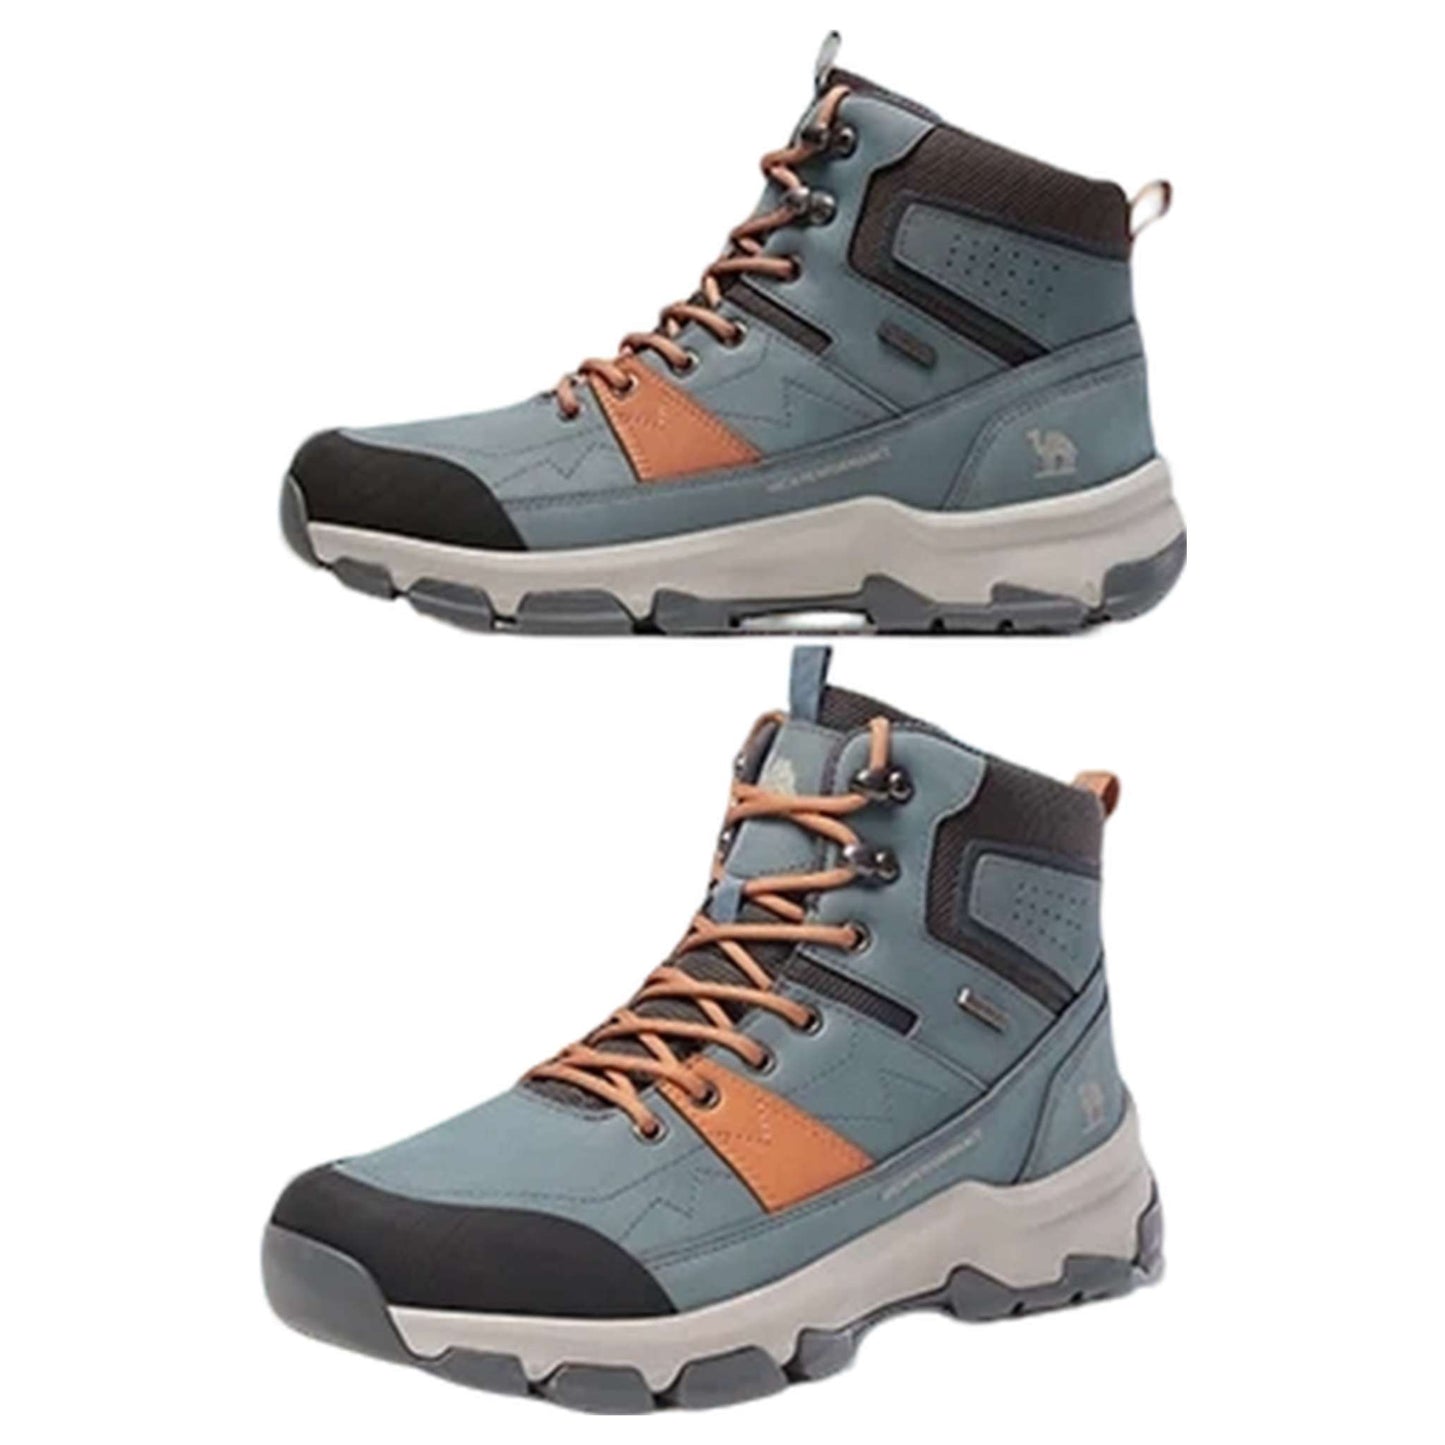 Men's High-Top Ankle Hiking Boots - Durable, Non-slip Outdoor Trekking Shoes